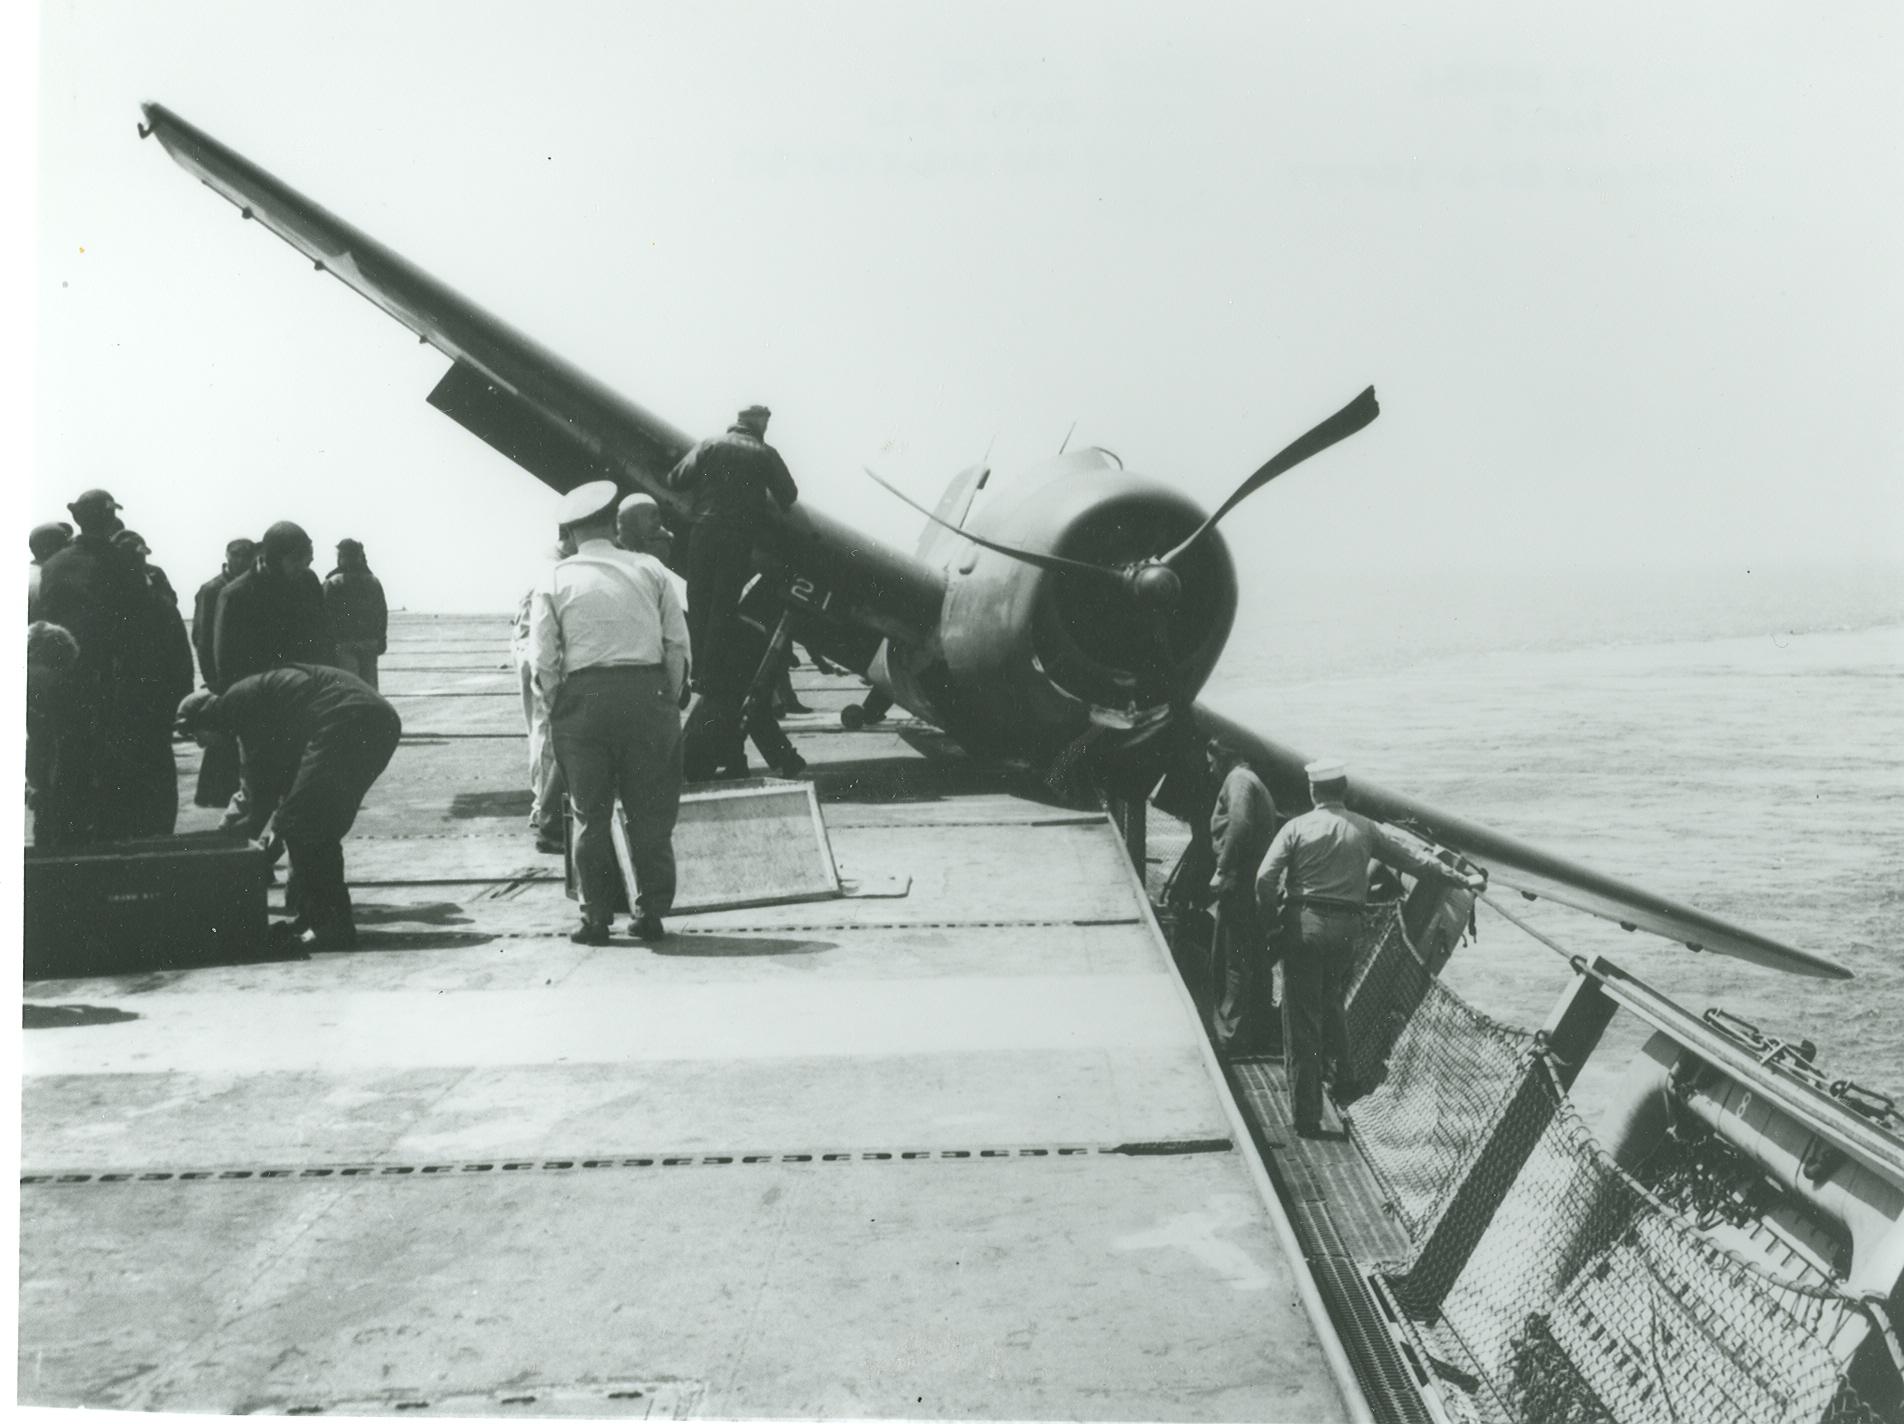 A Grumman F6F Hellcat with one wheel in the catwalks aboard the training aircraft carrier USS Wolverine on Lake Michigan, United States, 1945. Note the severely bent propeller blades.